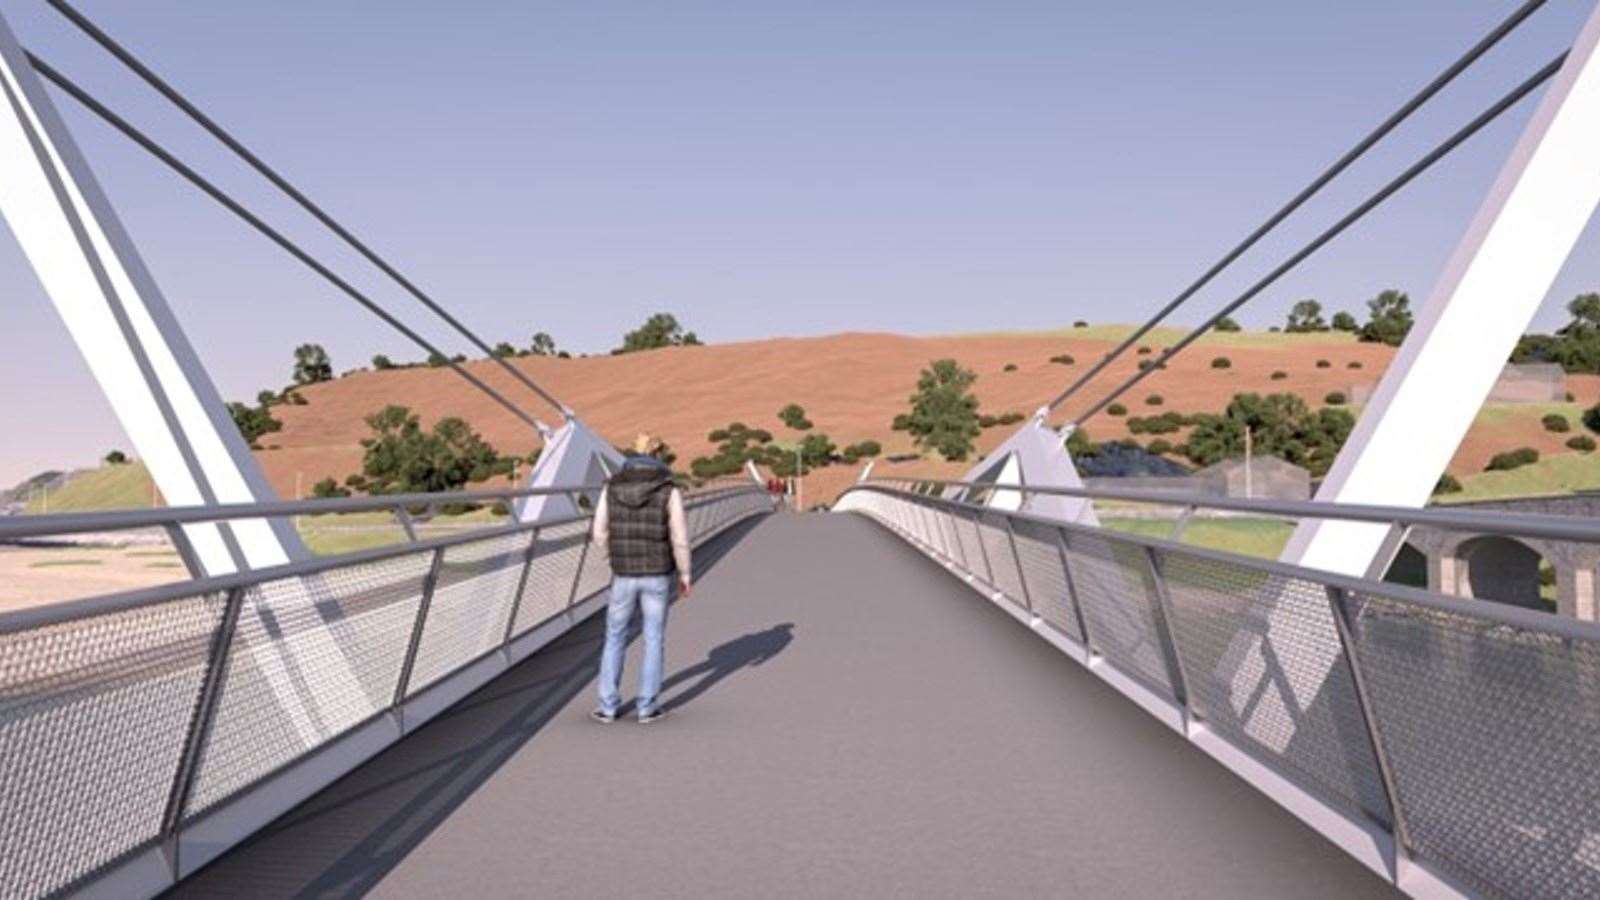 An artist's impression of the proposed Banff active travel bridge.